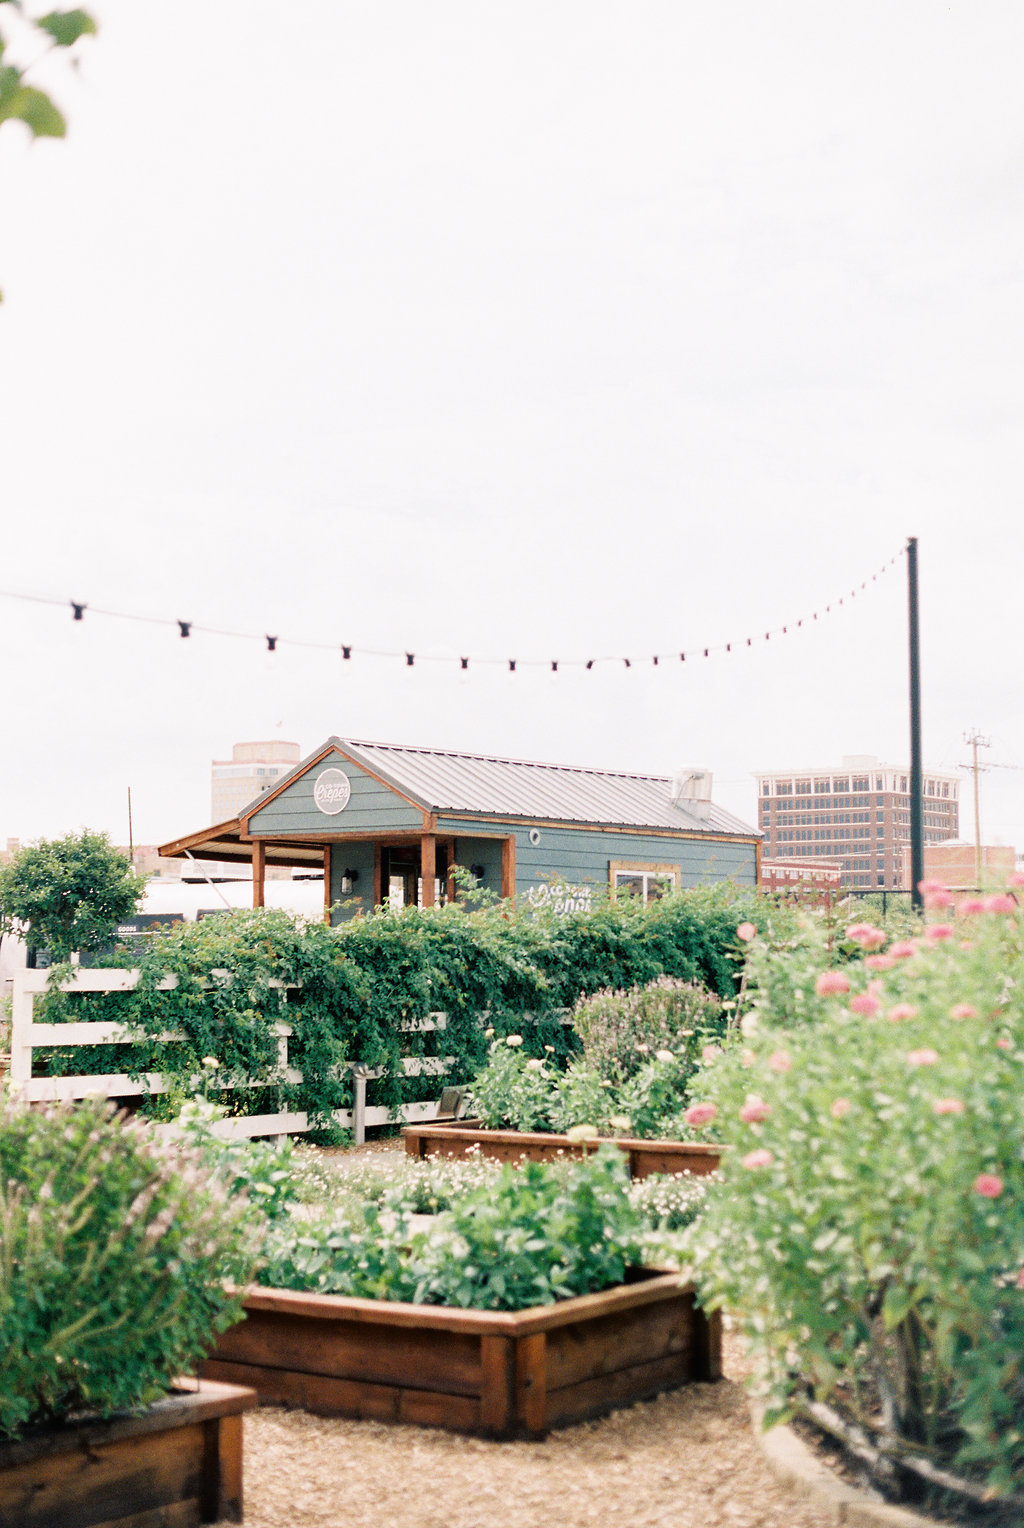 The 7 Things You Must Do at Magnolia Market on Cottage HIll | cottagehill.co21.jpg